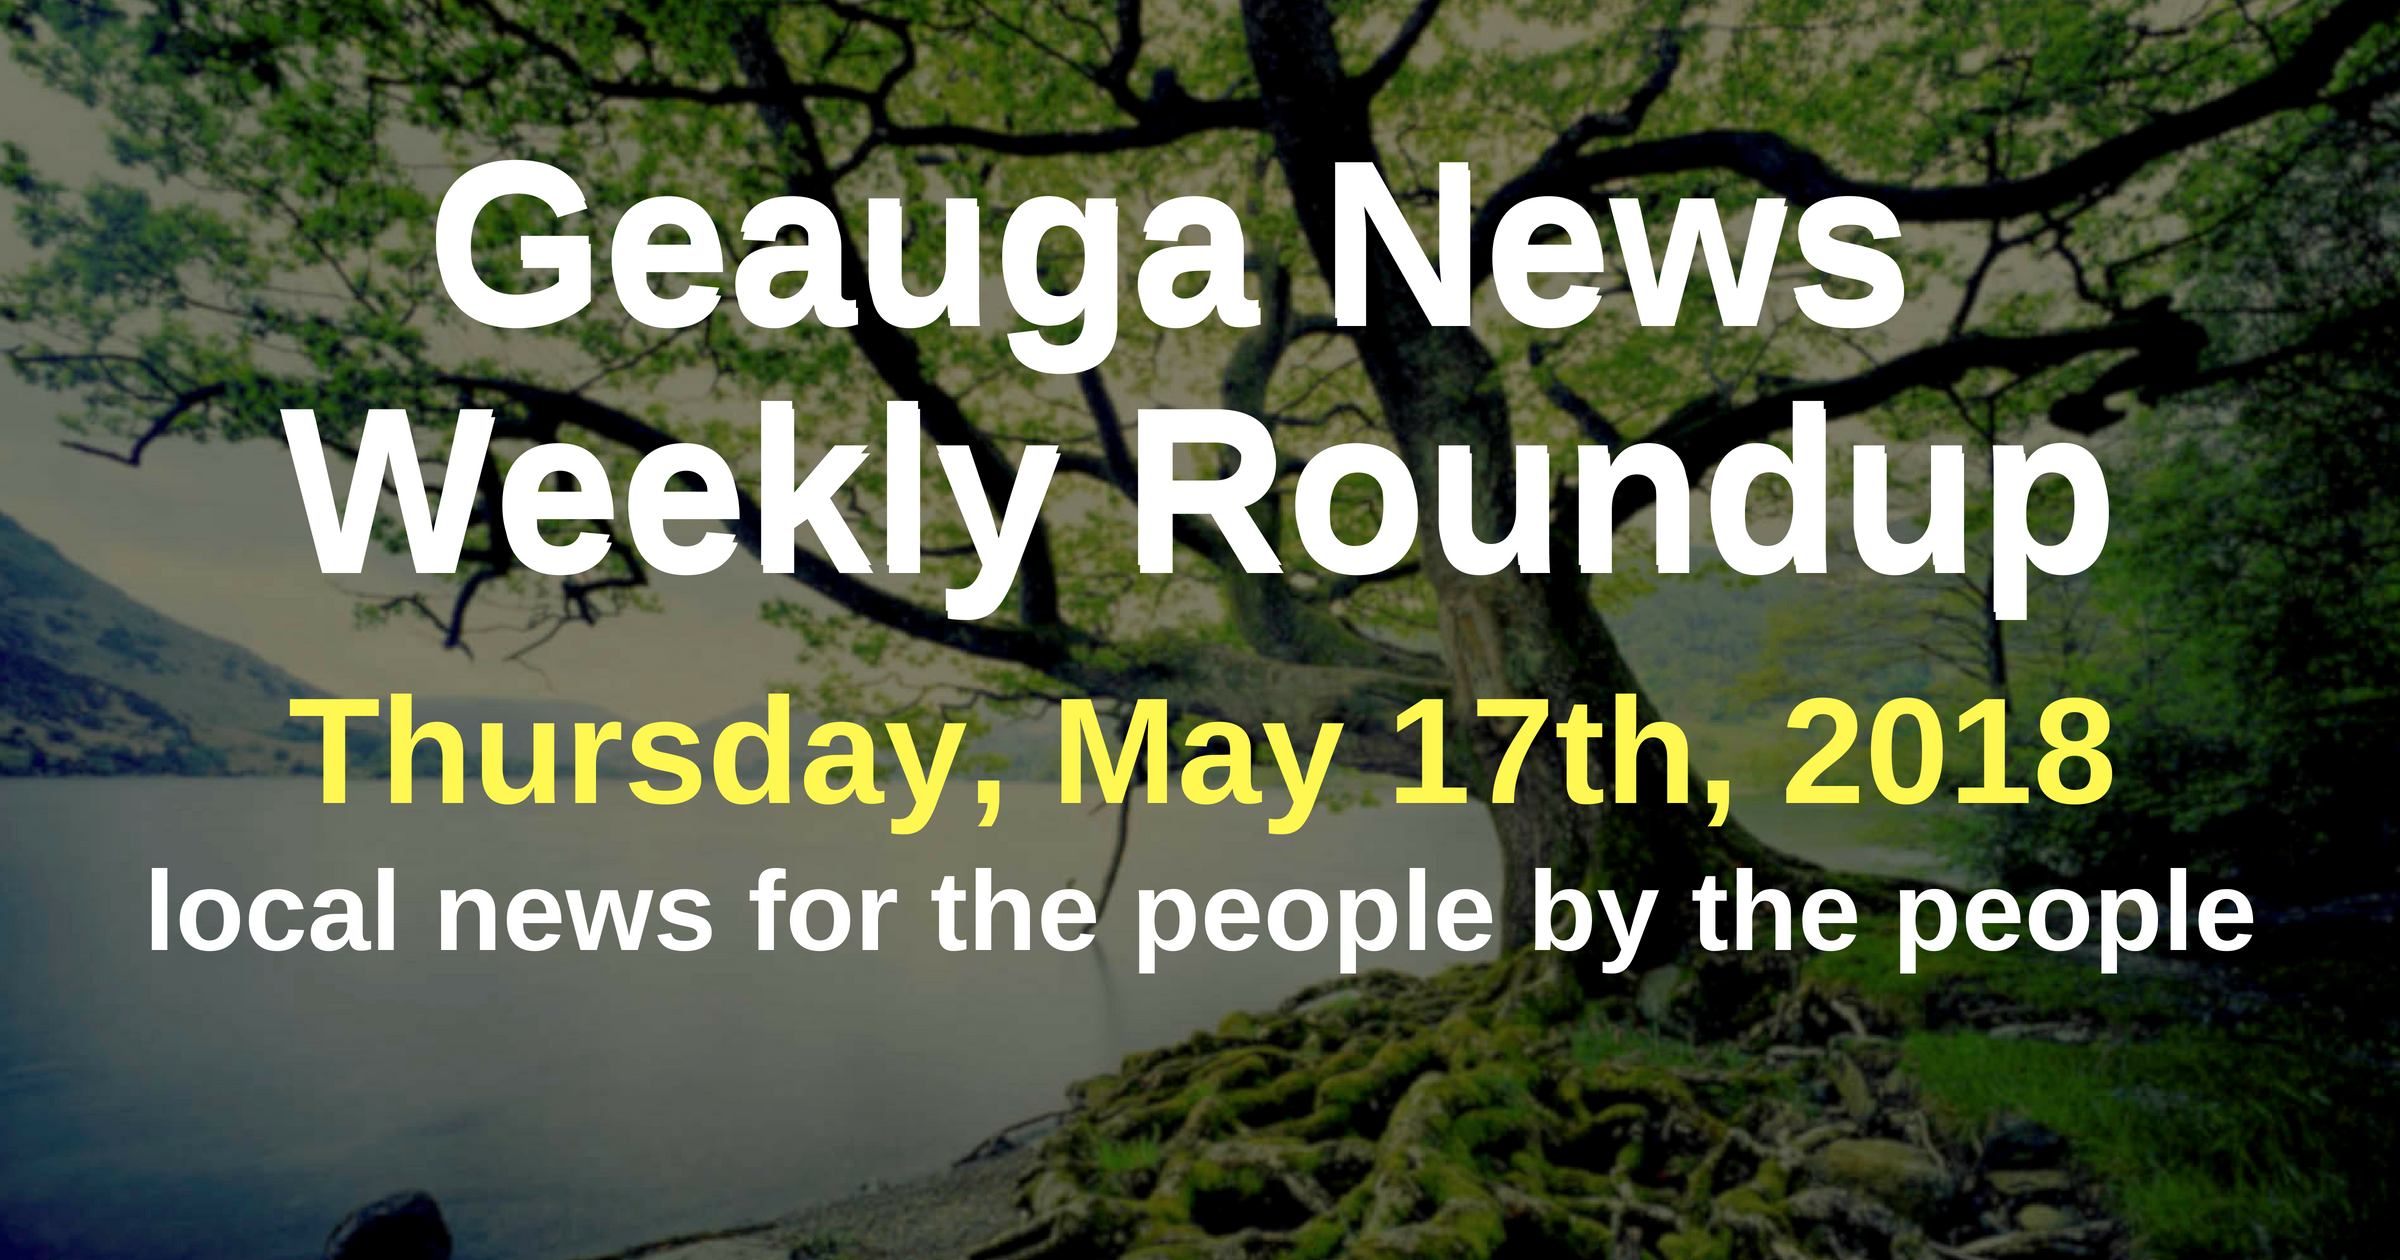 Geauga News Weekly Roundup Events and Activities for Geauga OH Community